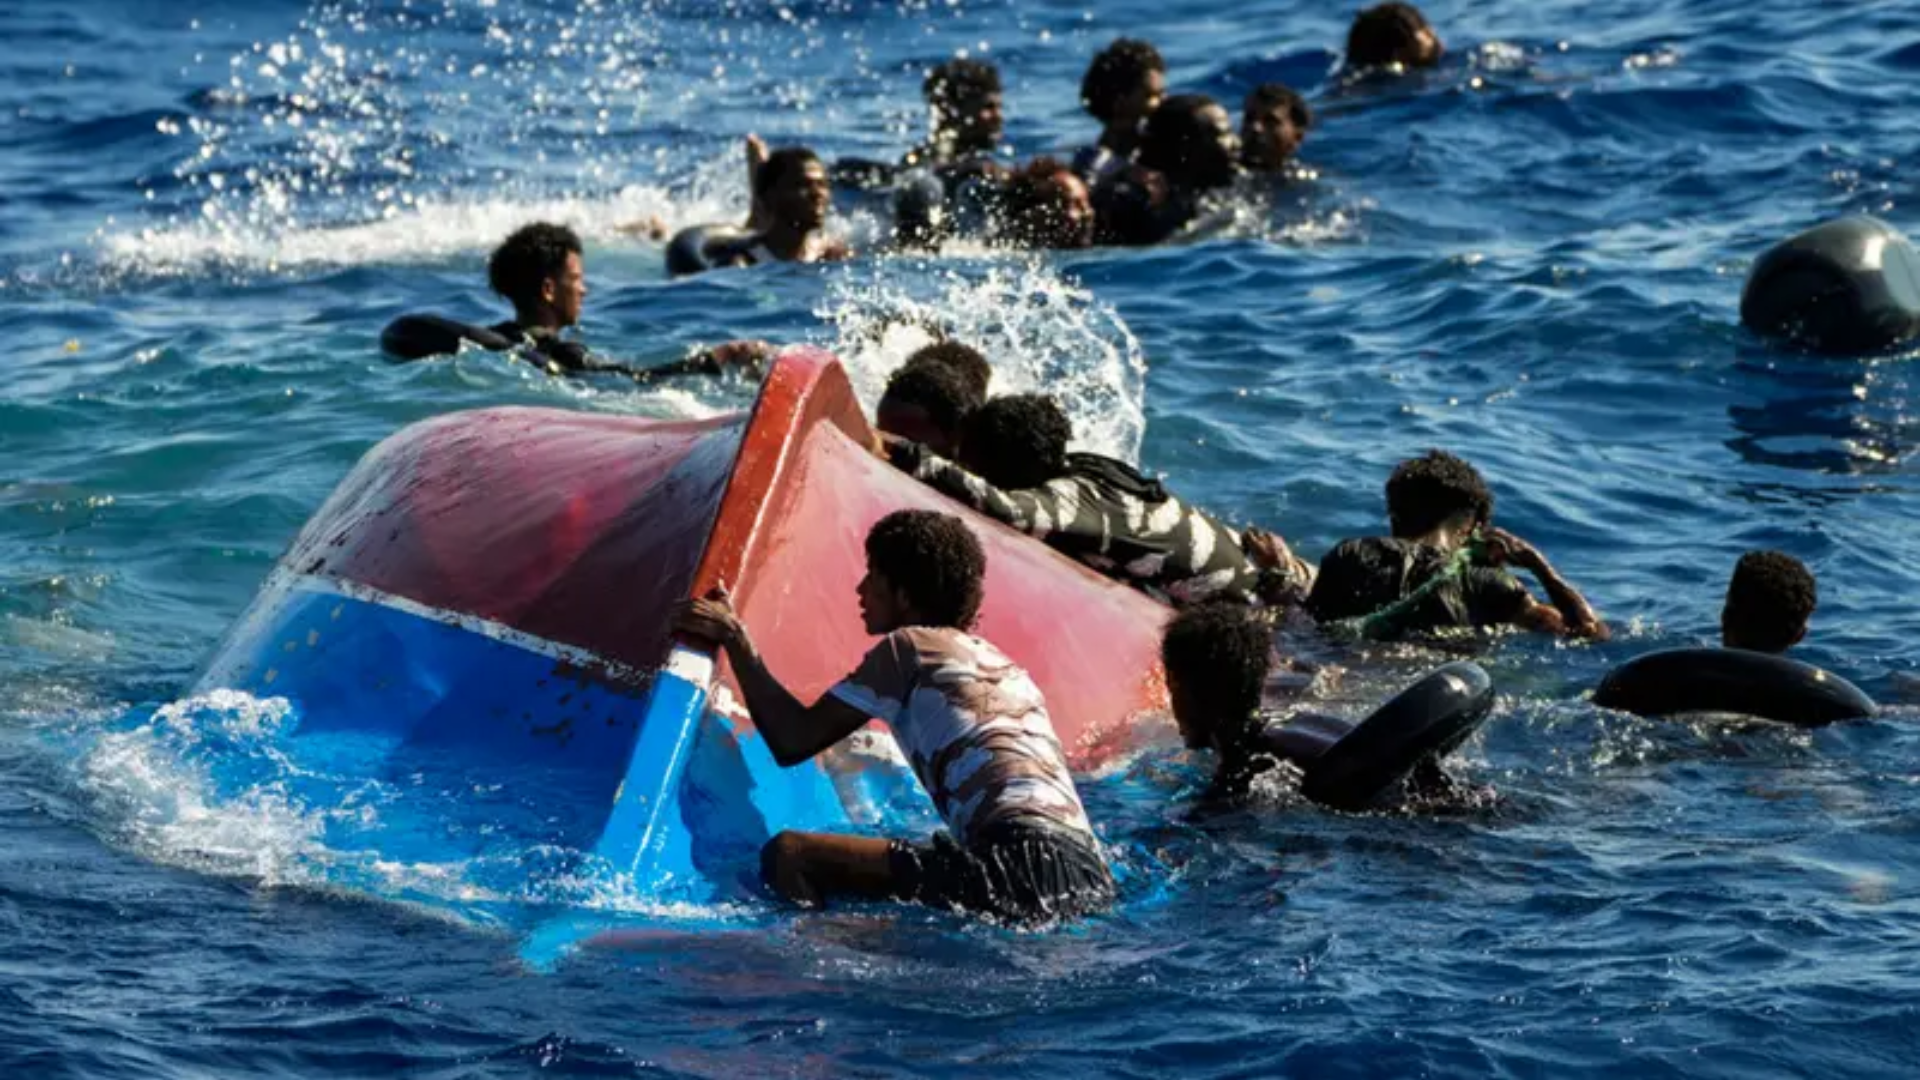 15 Dead, Dozens Missing After Migrant Boat Capsizes Off African Coast